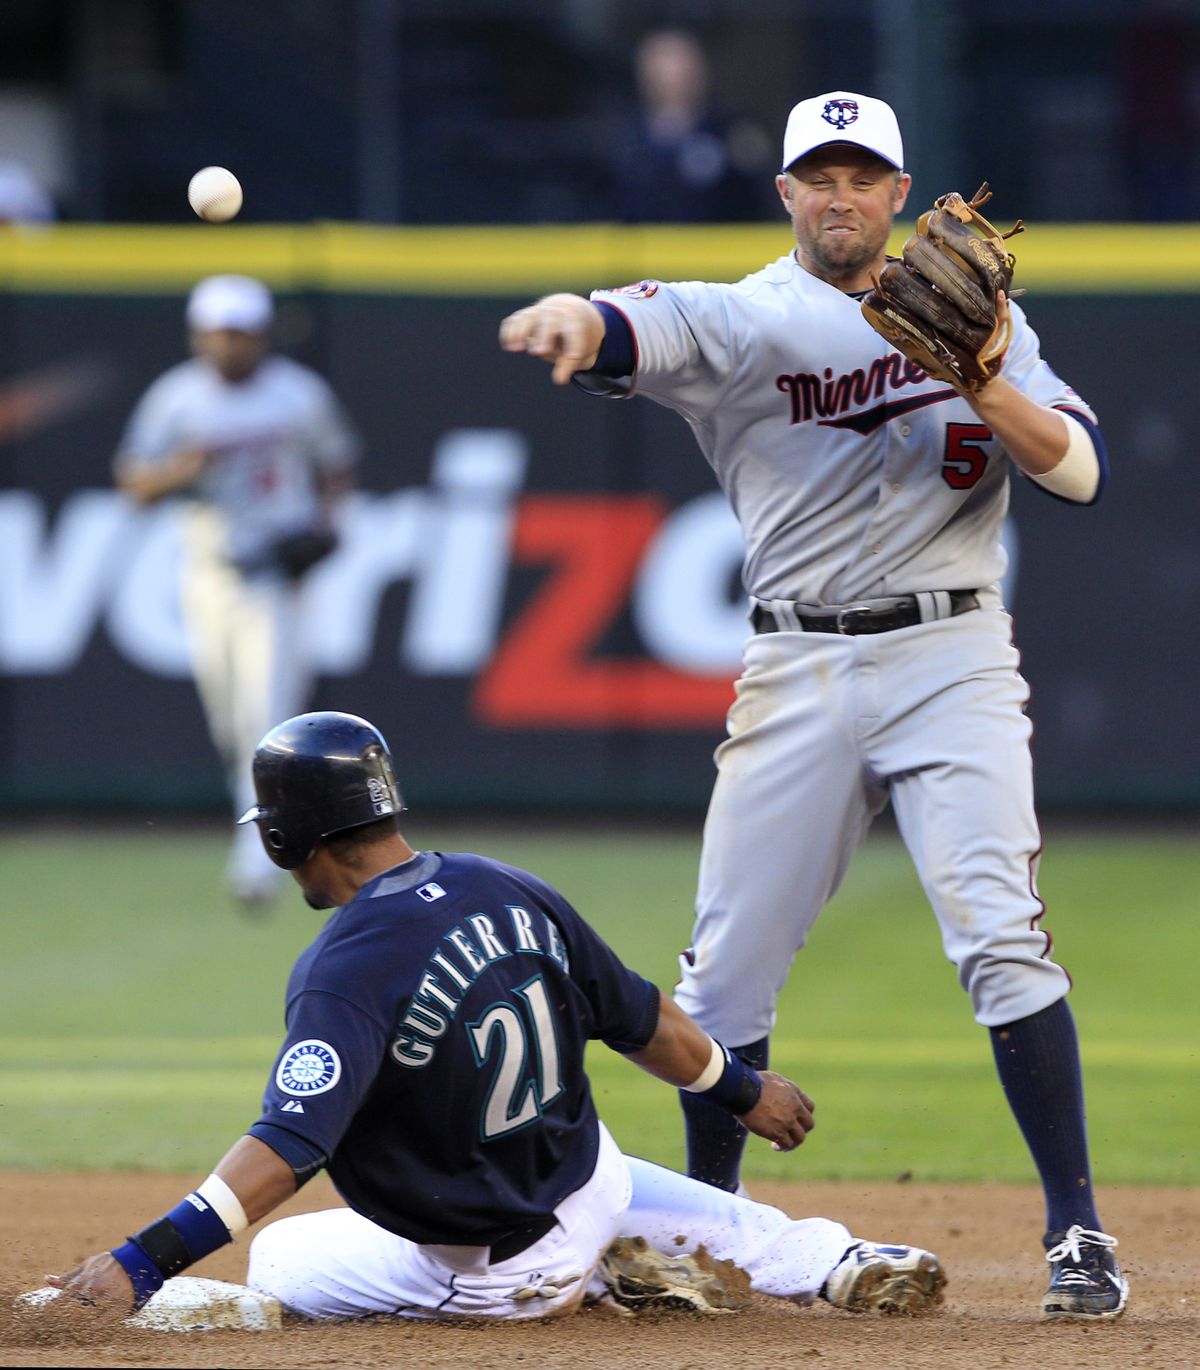 Seattle’s Franklin Gutierrez is forced at second by Minnesota’s Michael Cuddyer as the Twins turn a double play.  (Associated Press)